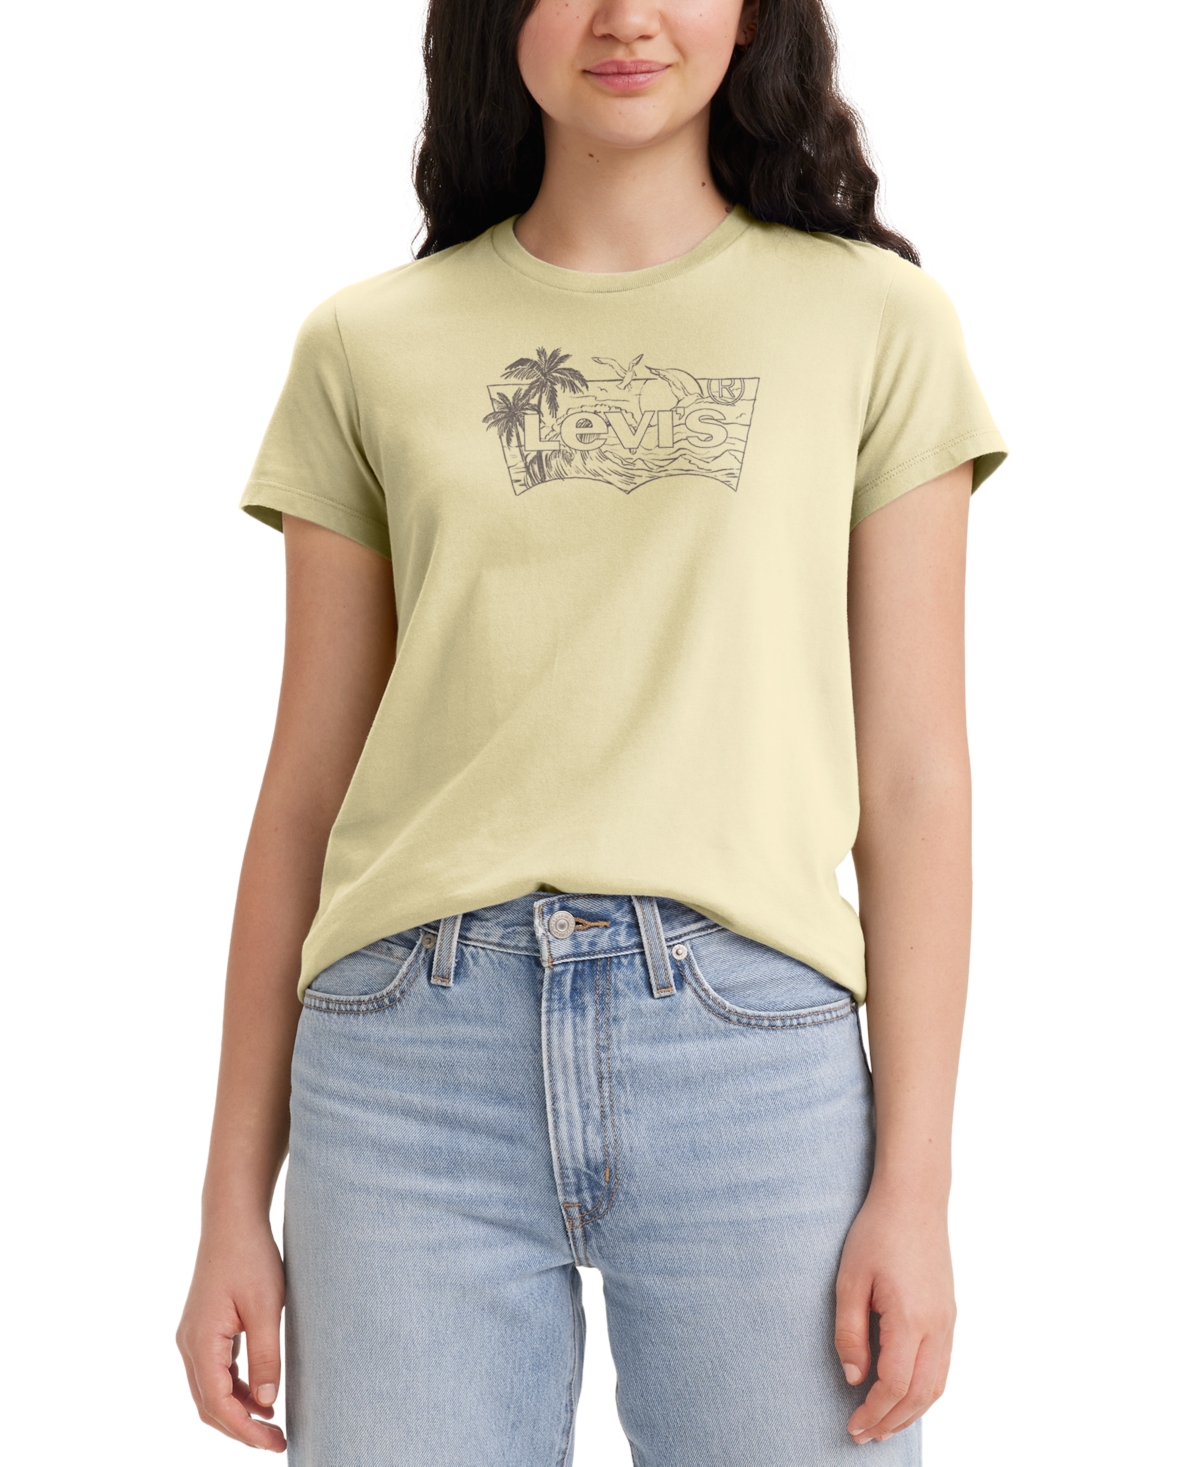 Trendy Plus Size Perfect Logo T-Shirt - Each Sketch Anise Flower